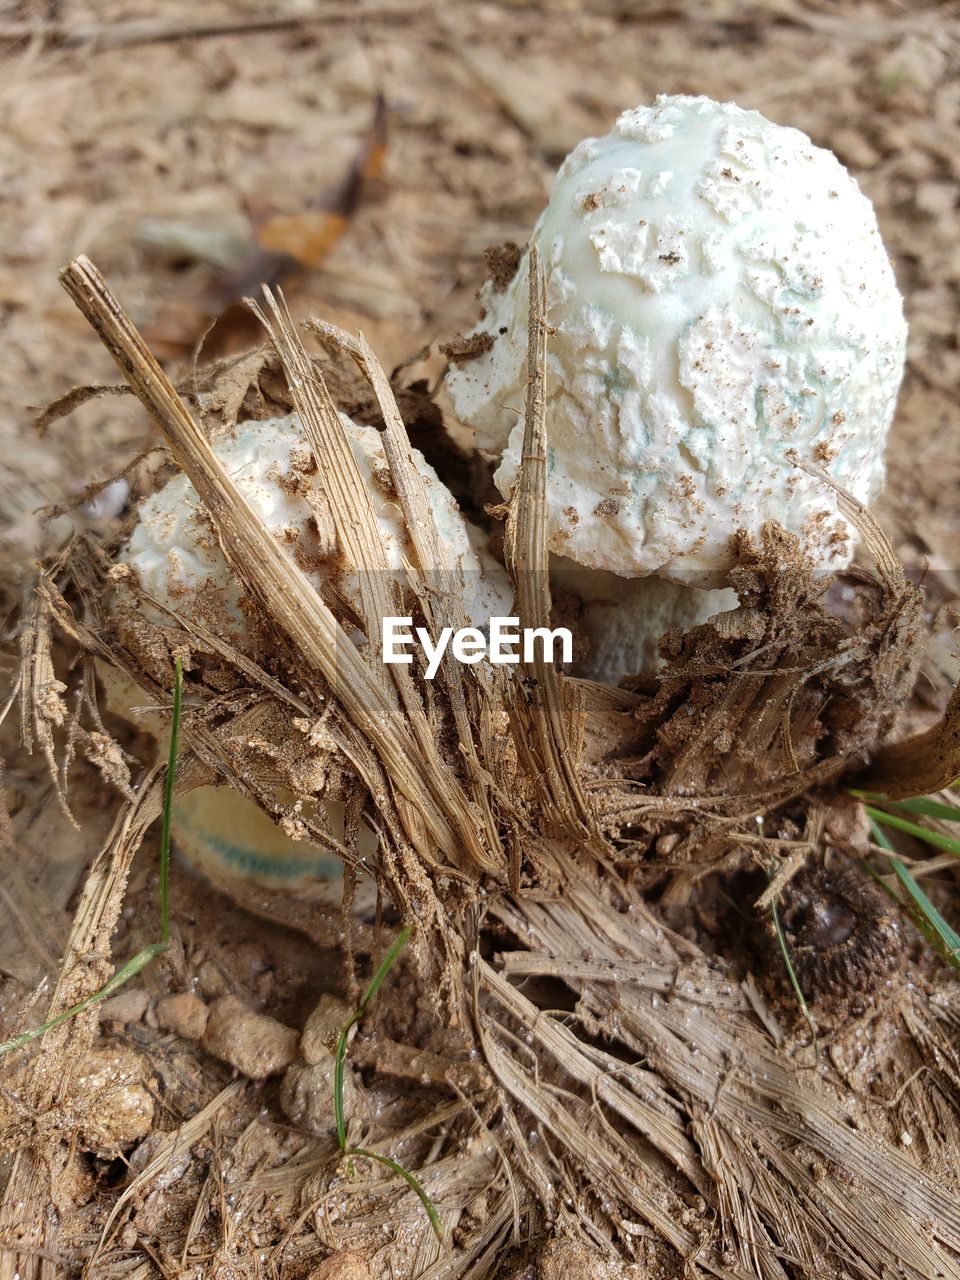 CLOSE-UP OF DEAD PLANT IN NEST